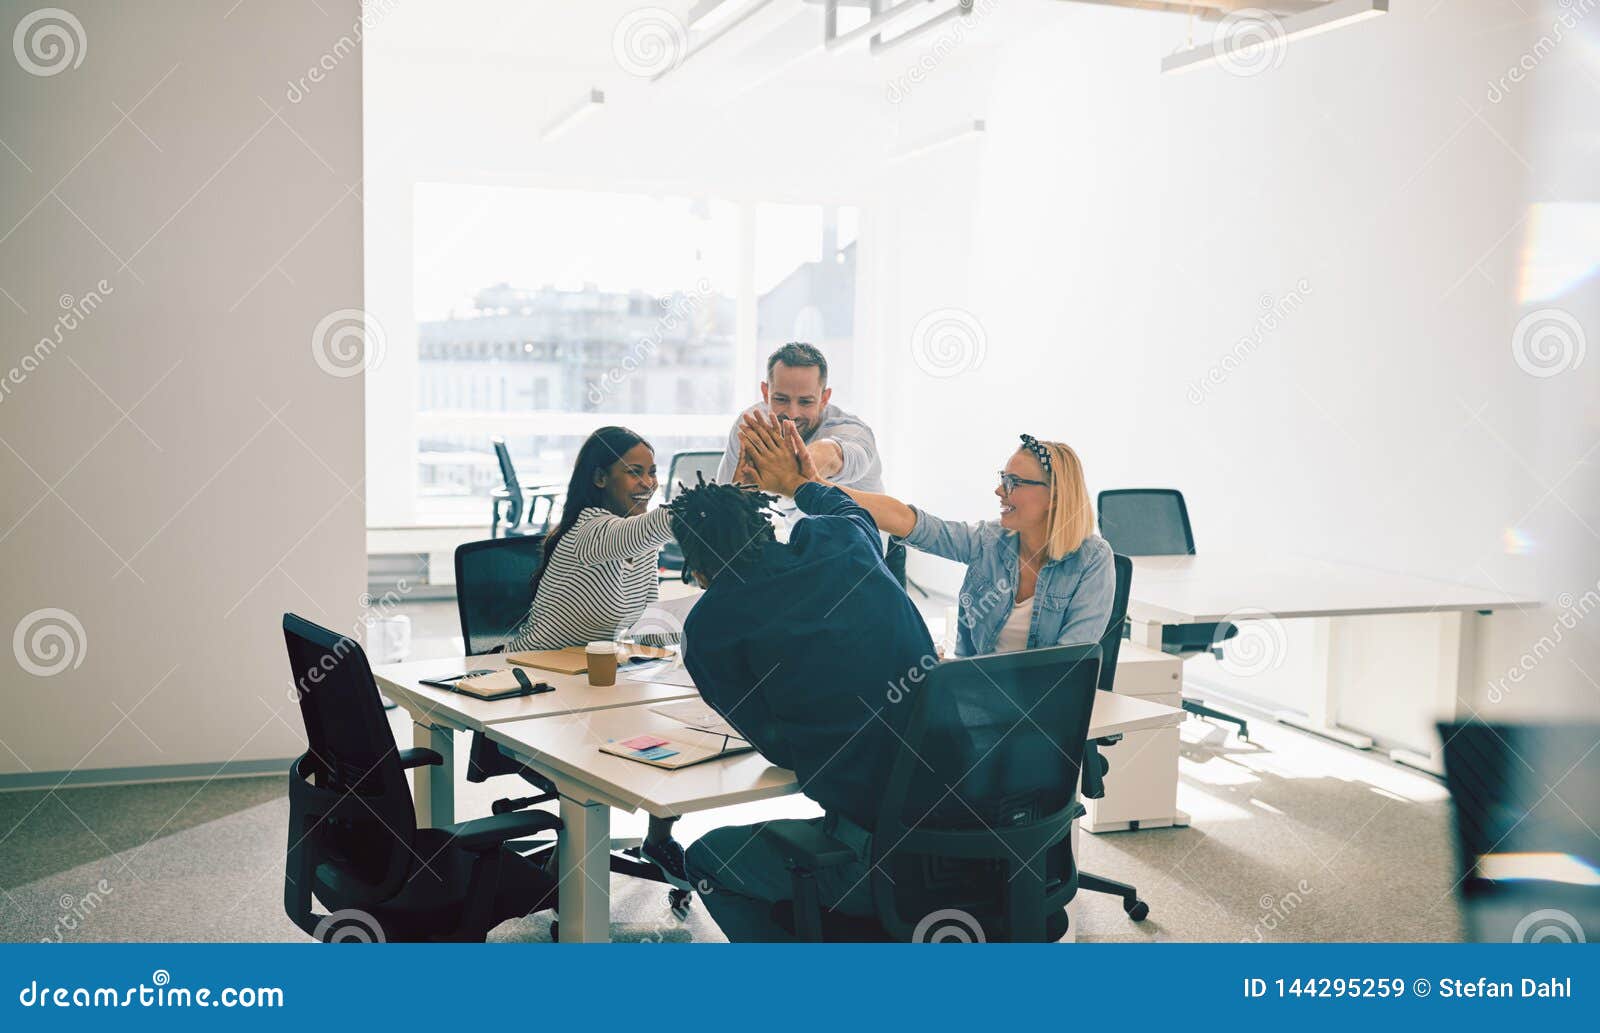 group of smiling colleagues high fiving during an office meeting